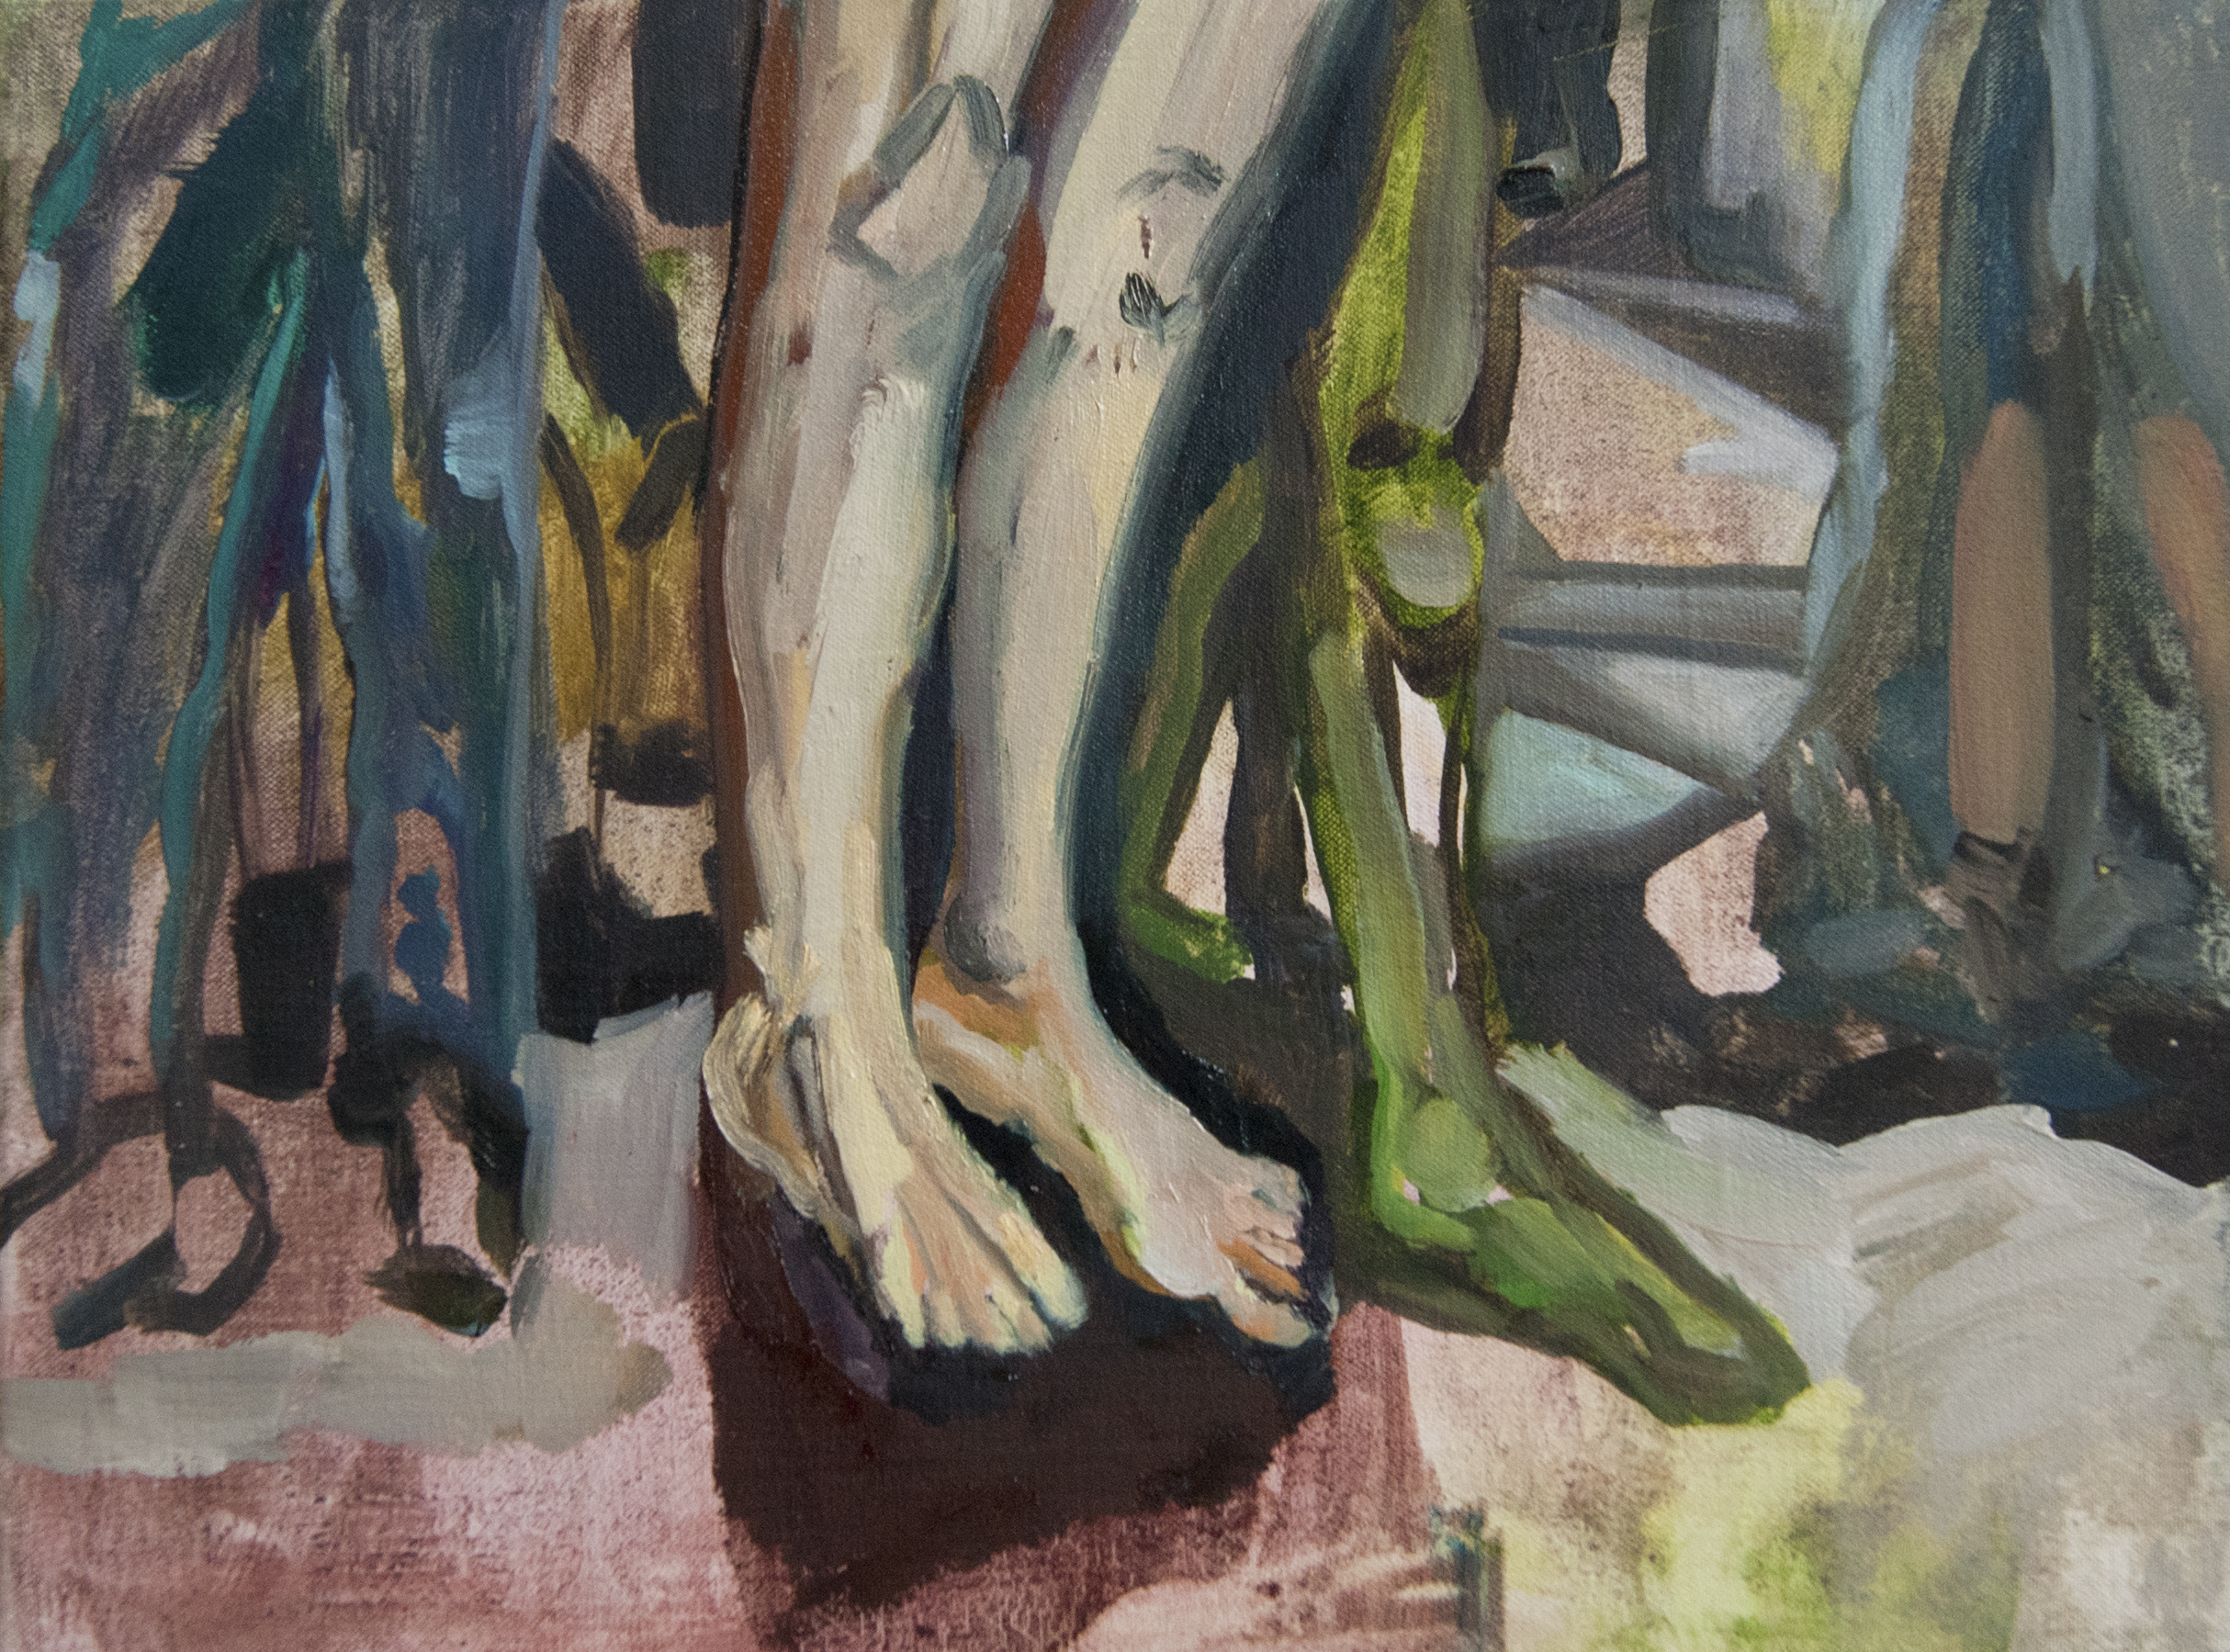  Belief in everything (superhero legs), 2013, oil on canvas, 12 x 16 inches. 